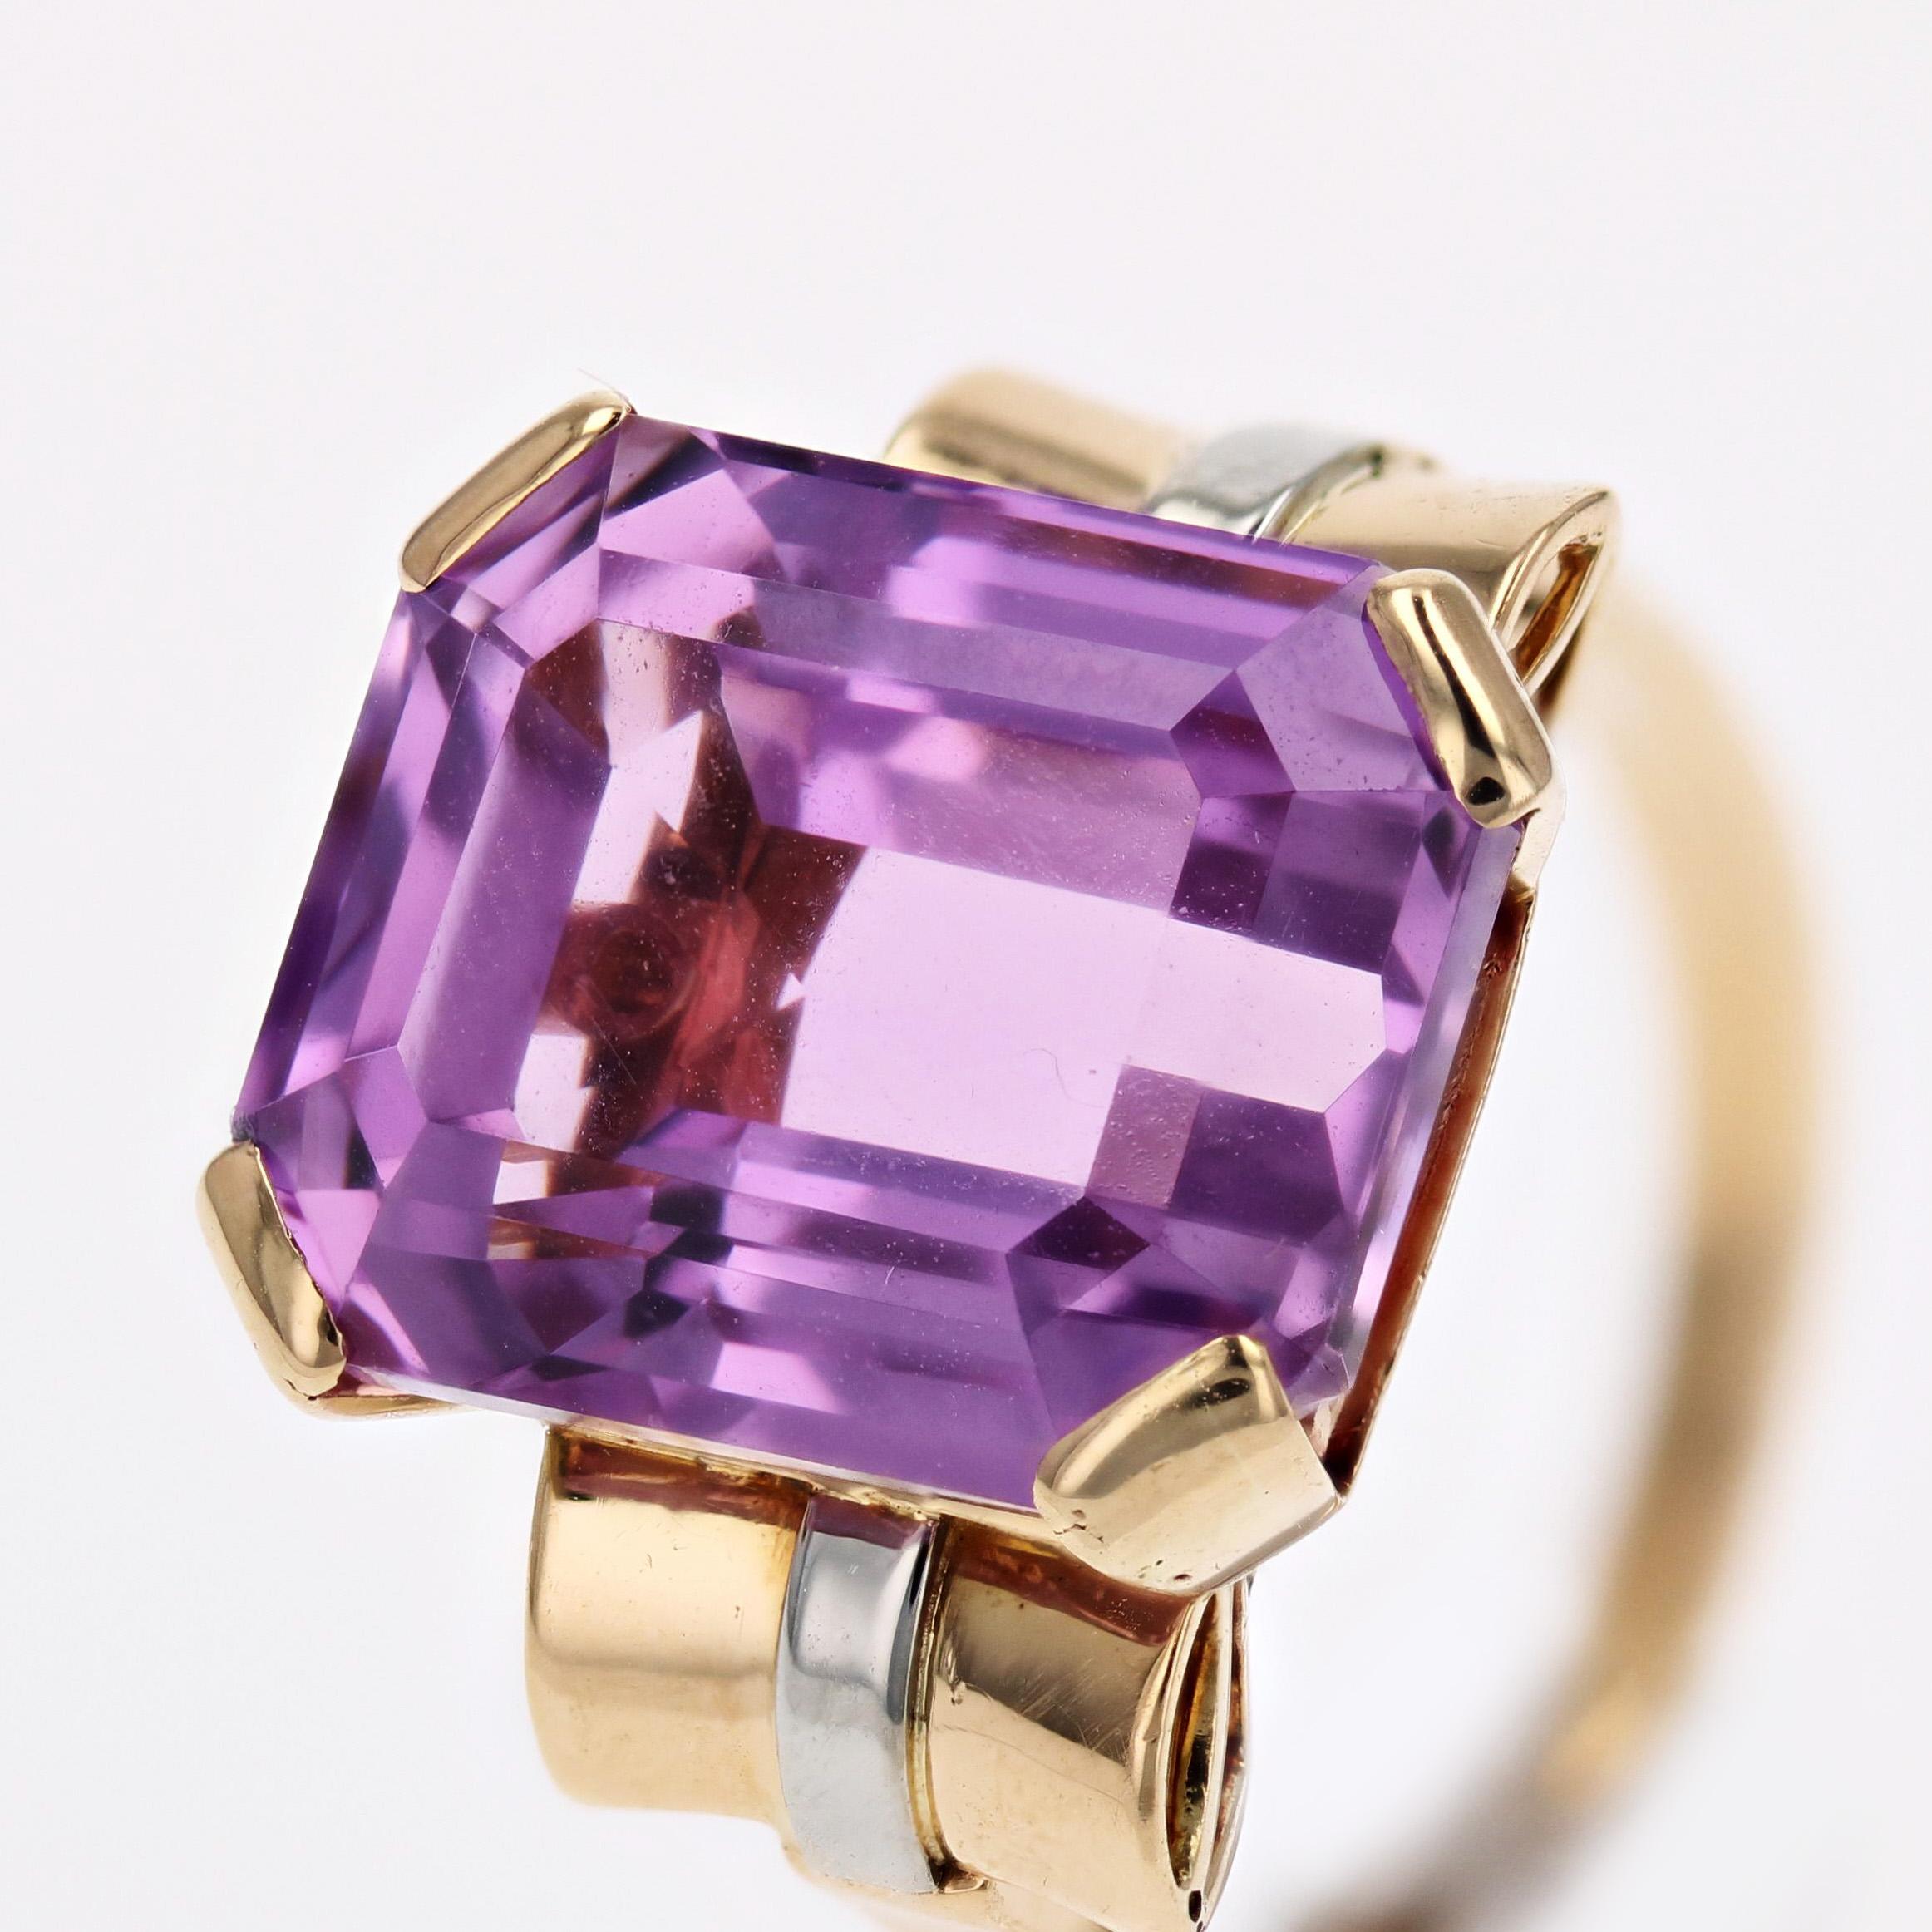 French Retro 1950s 11.29 Carats Kunzite 18 Karat Yellow Gold Cocktail Ring For Sale 4